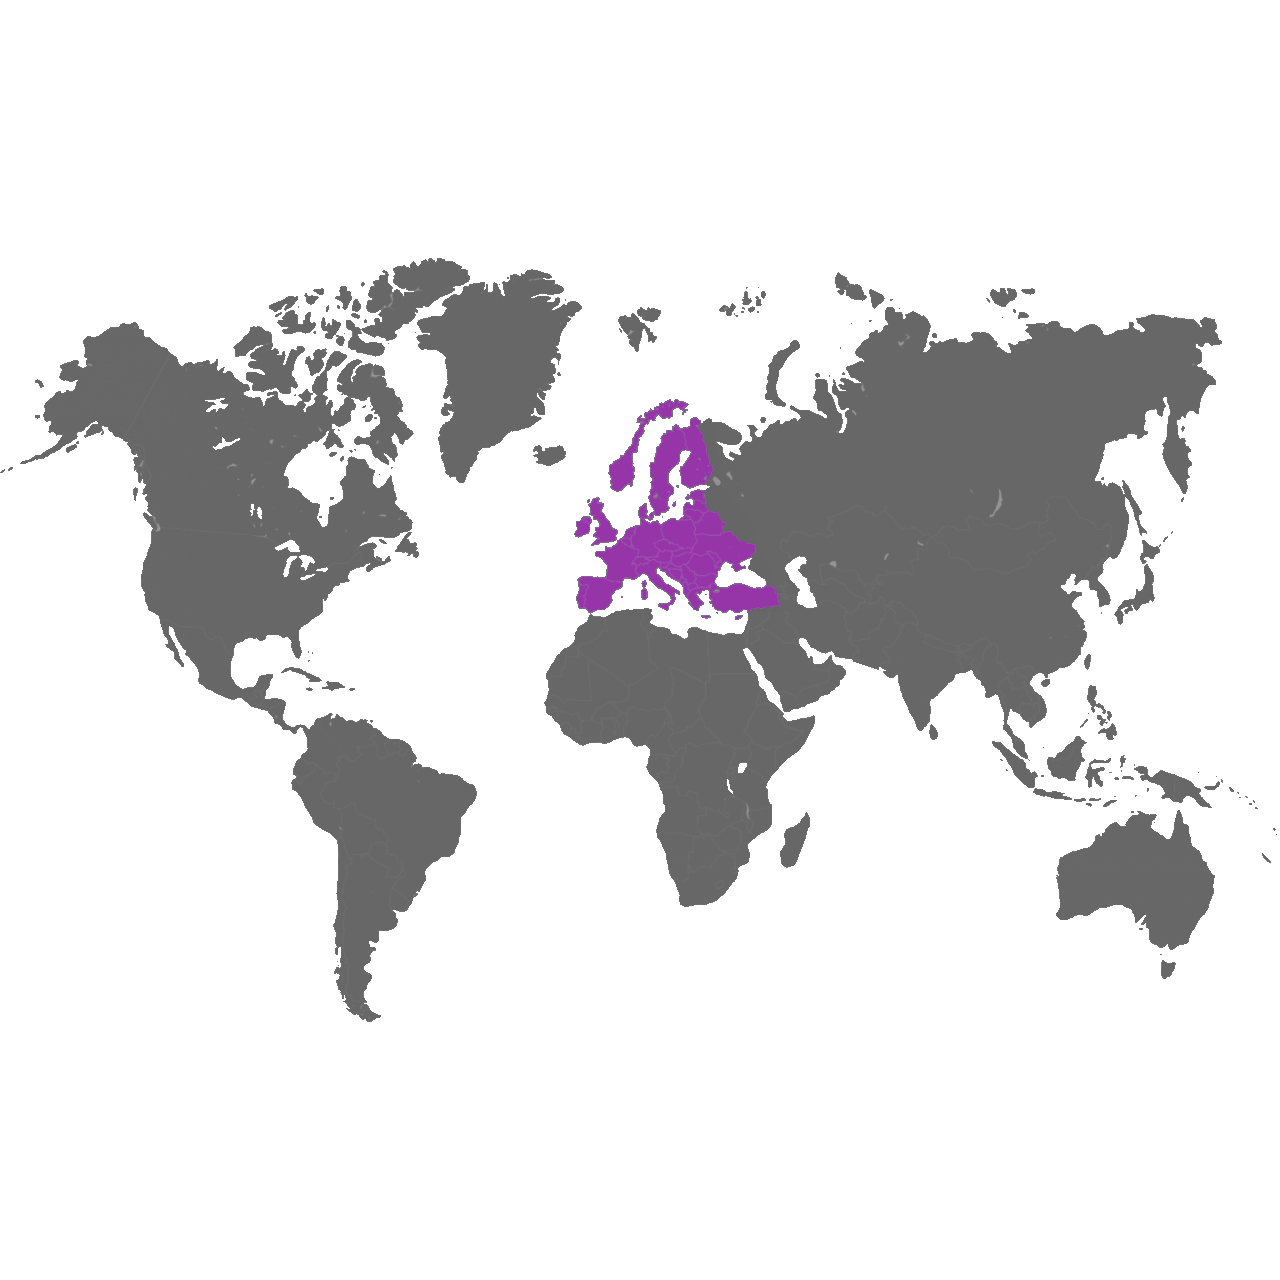 Map Image of Europe and UK Regions for i4T Global Licence Holders